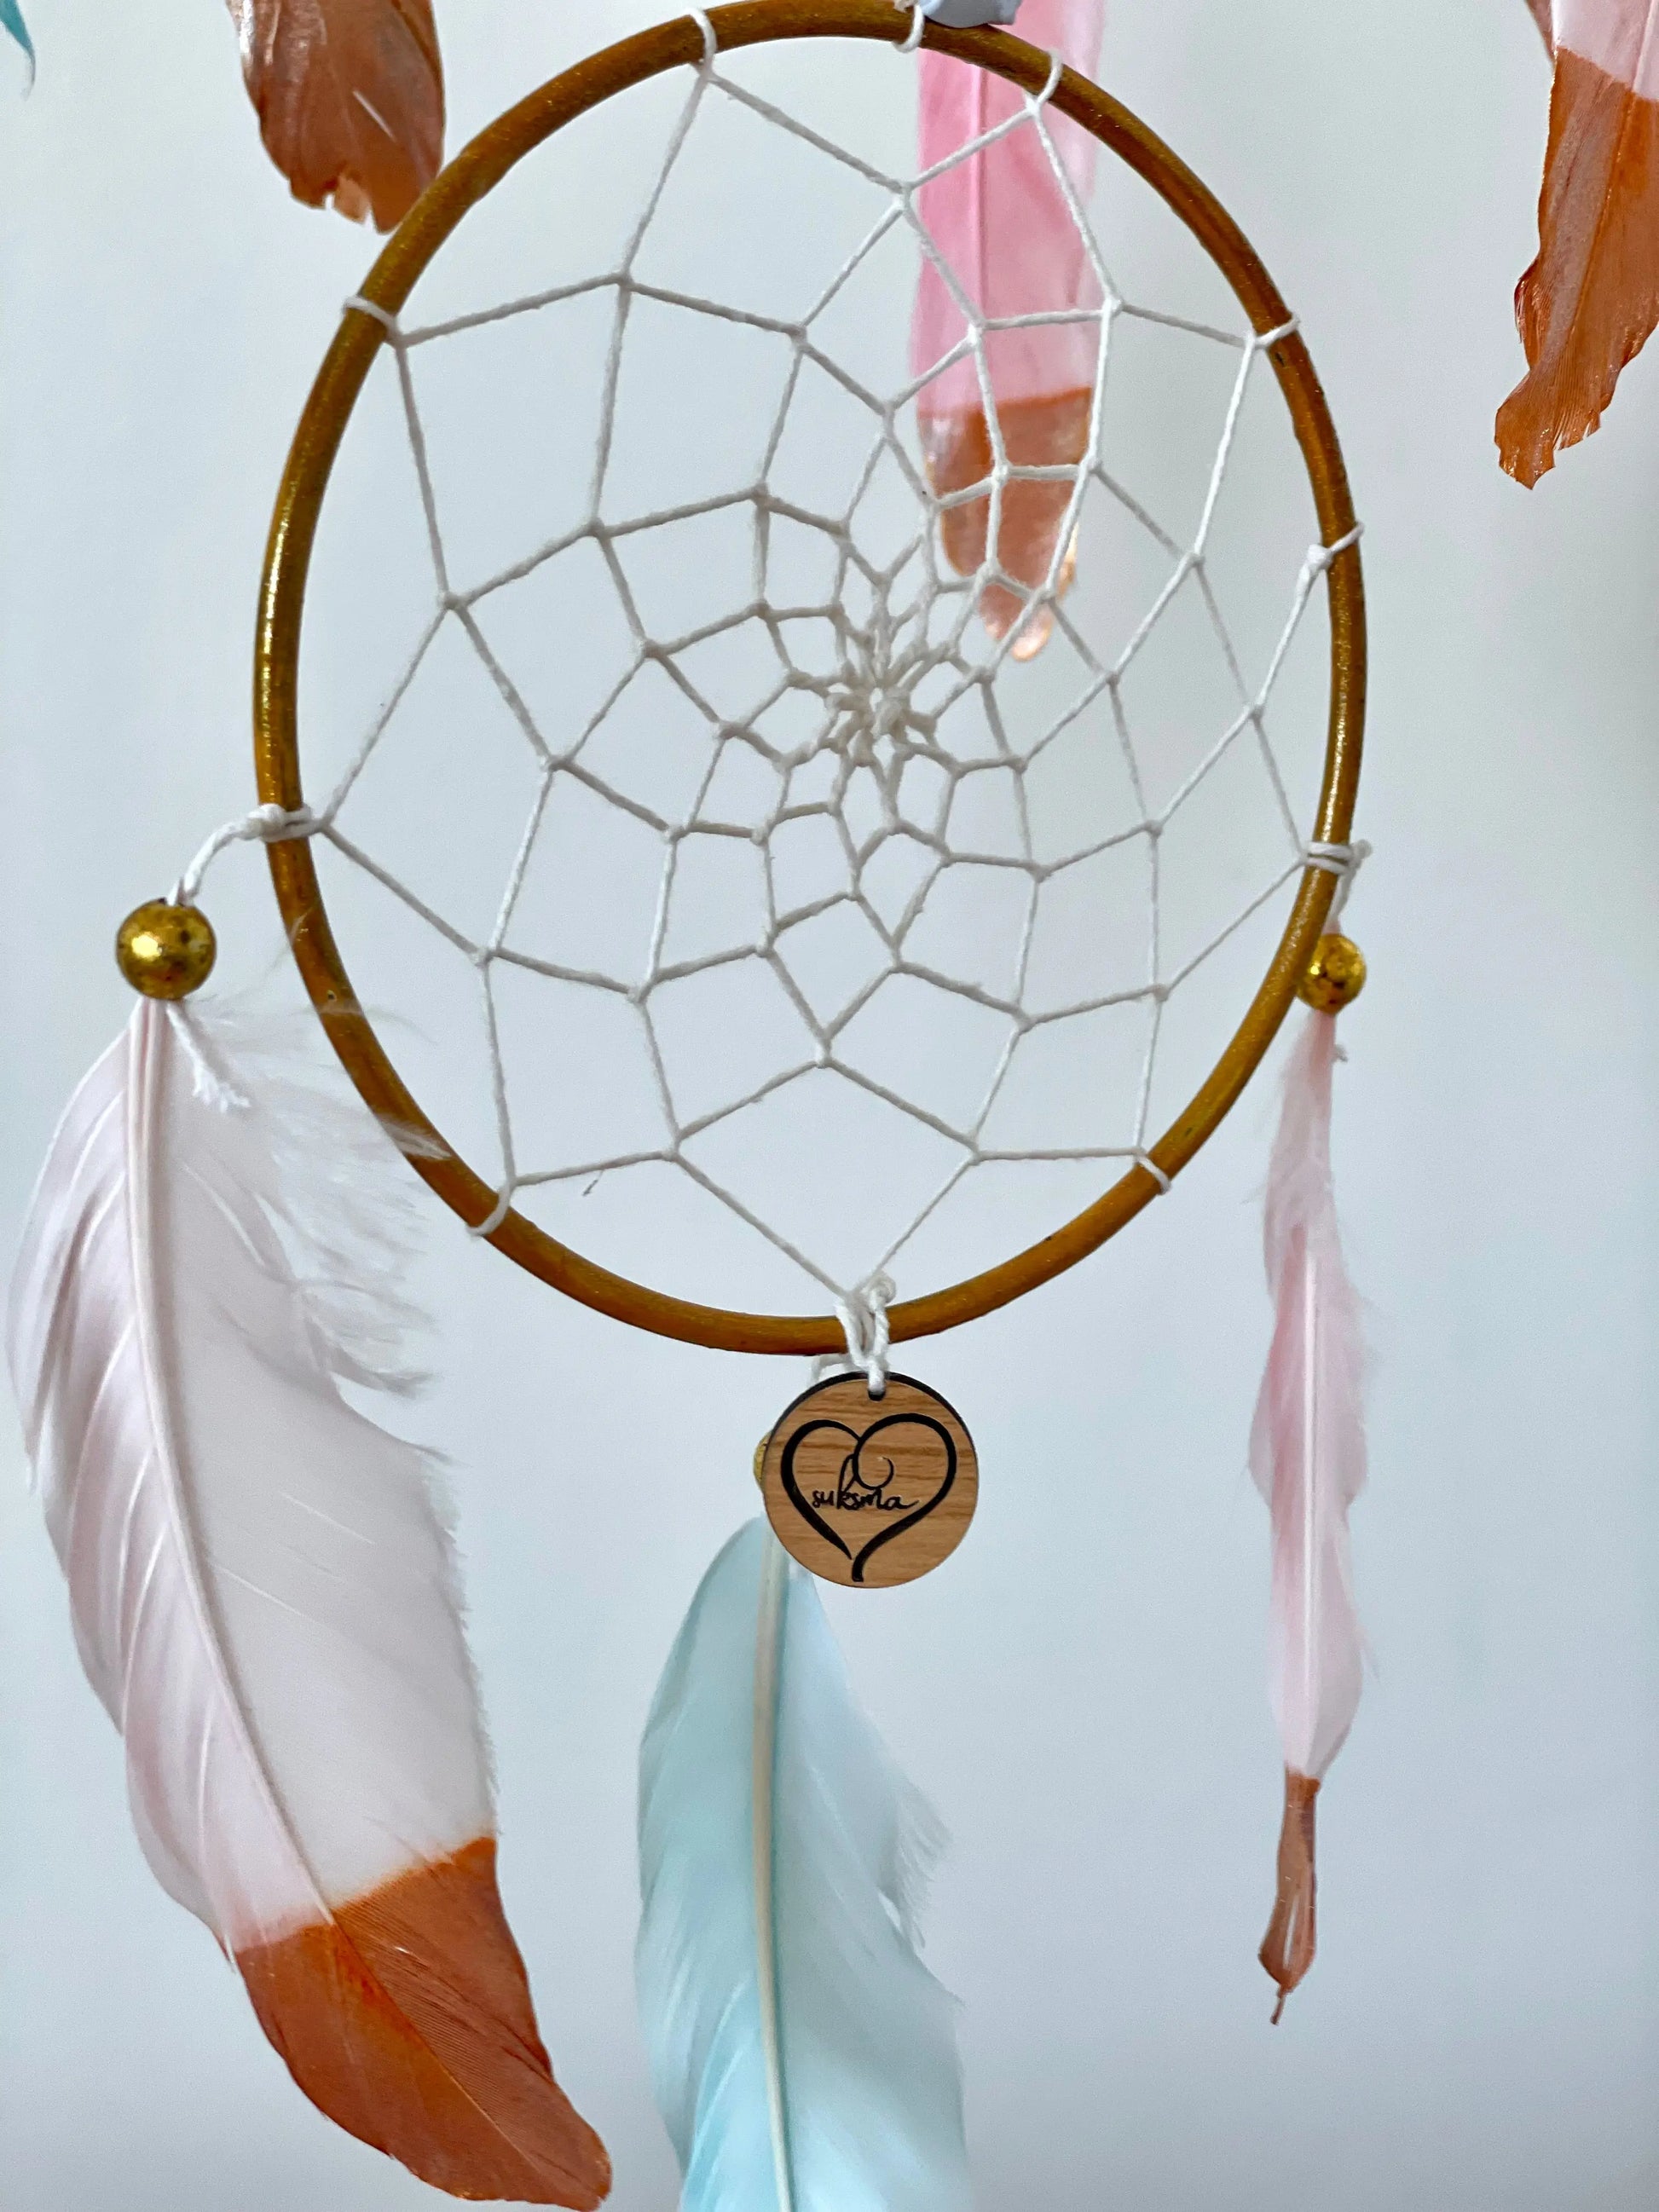 Feather Dreamcatcher Mobile Suksma from Bali